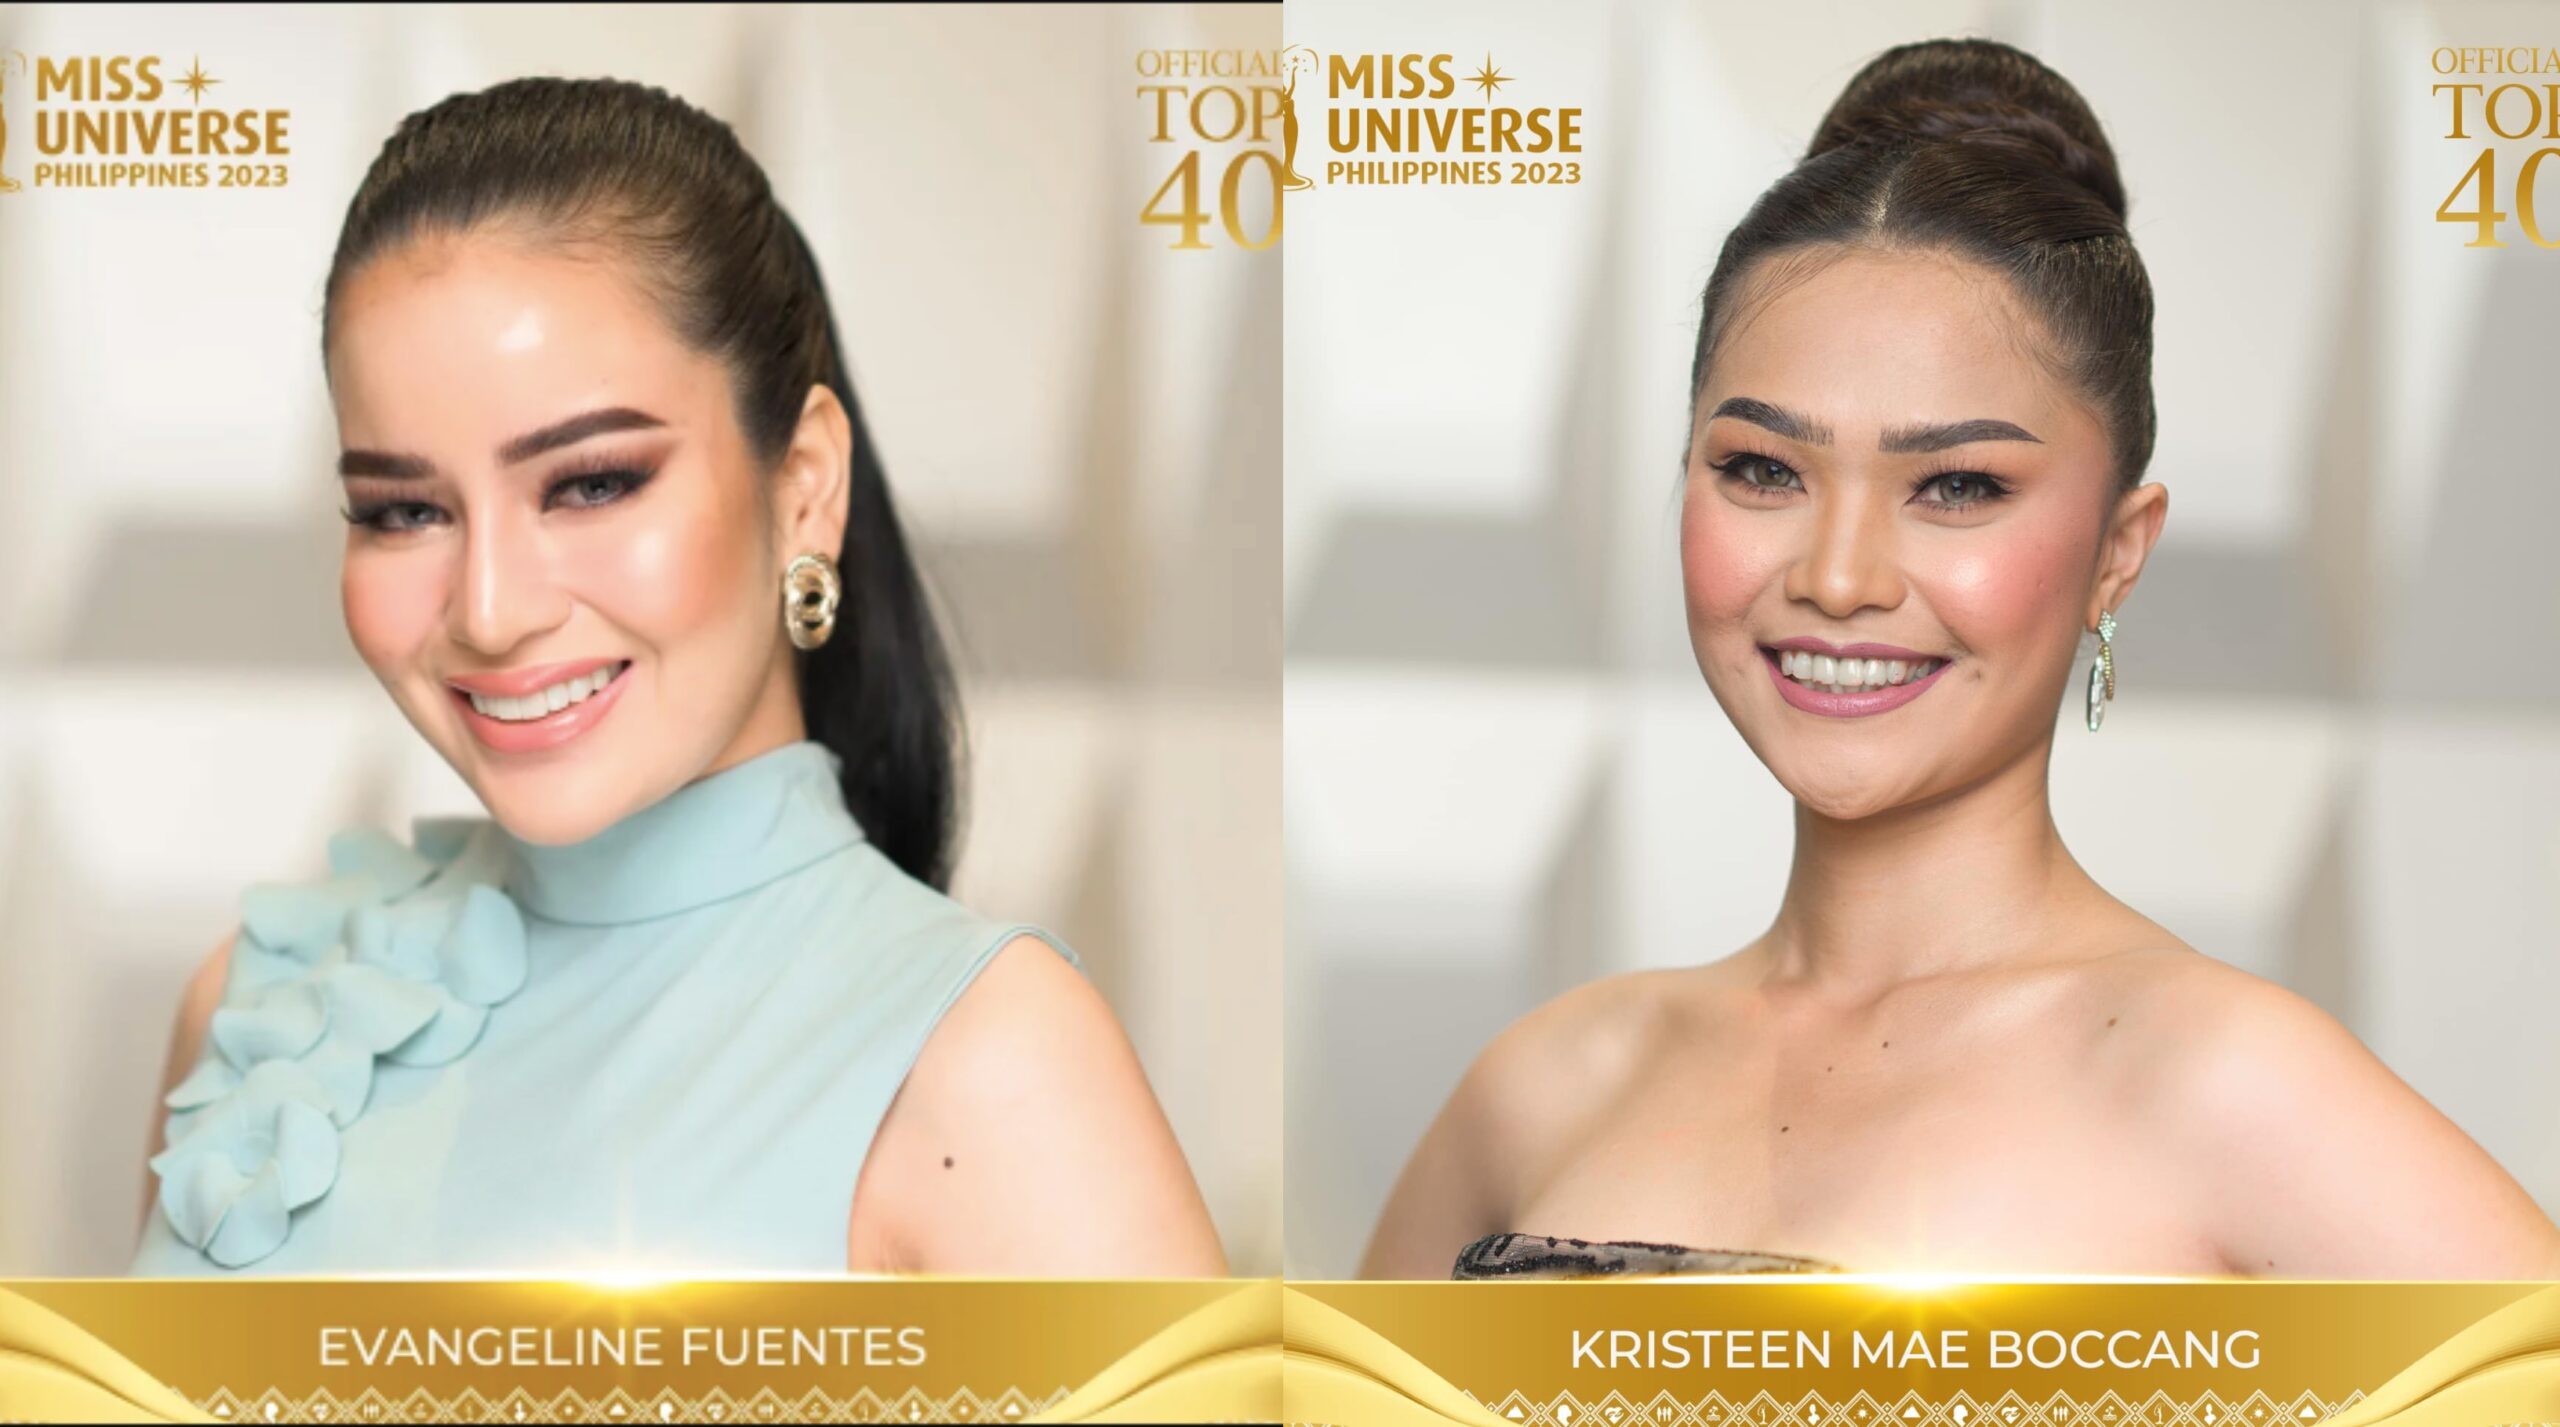 Miss Universe PH updates roster for 2023 pageant after one candidate withdraws